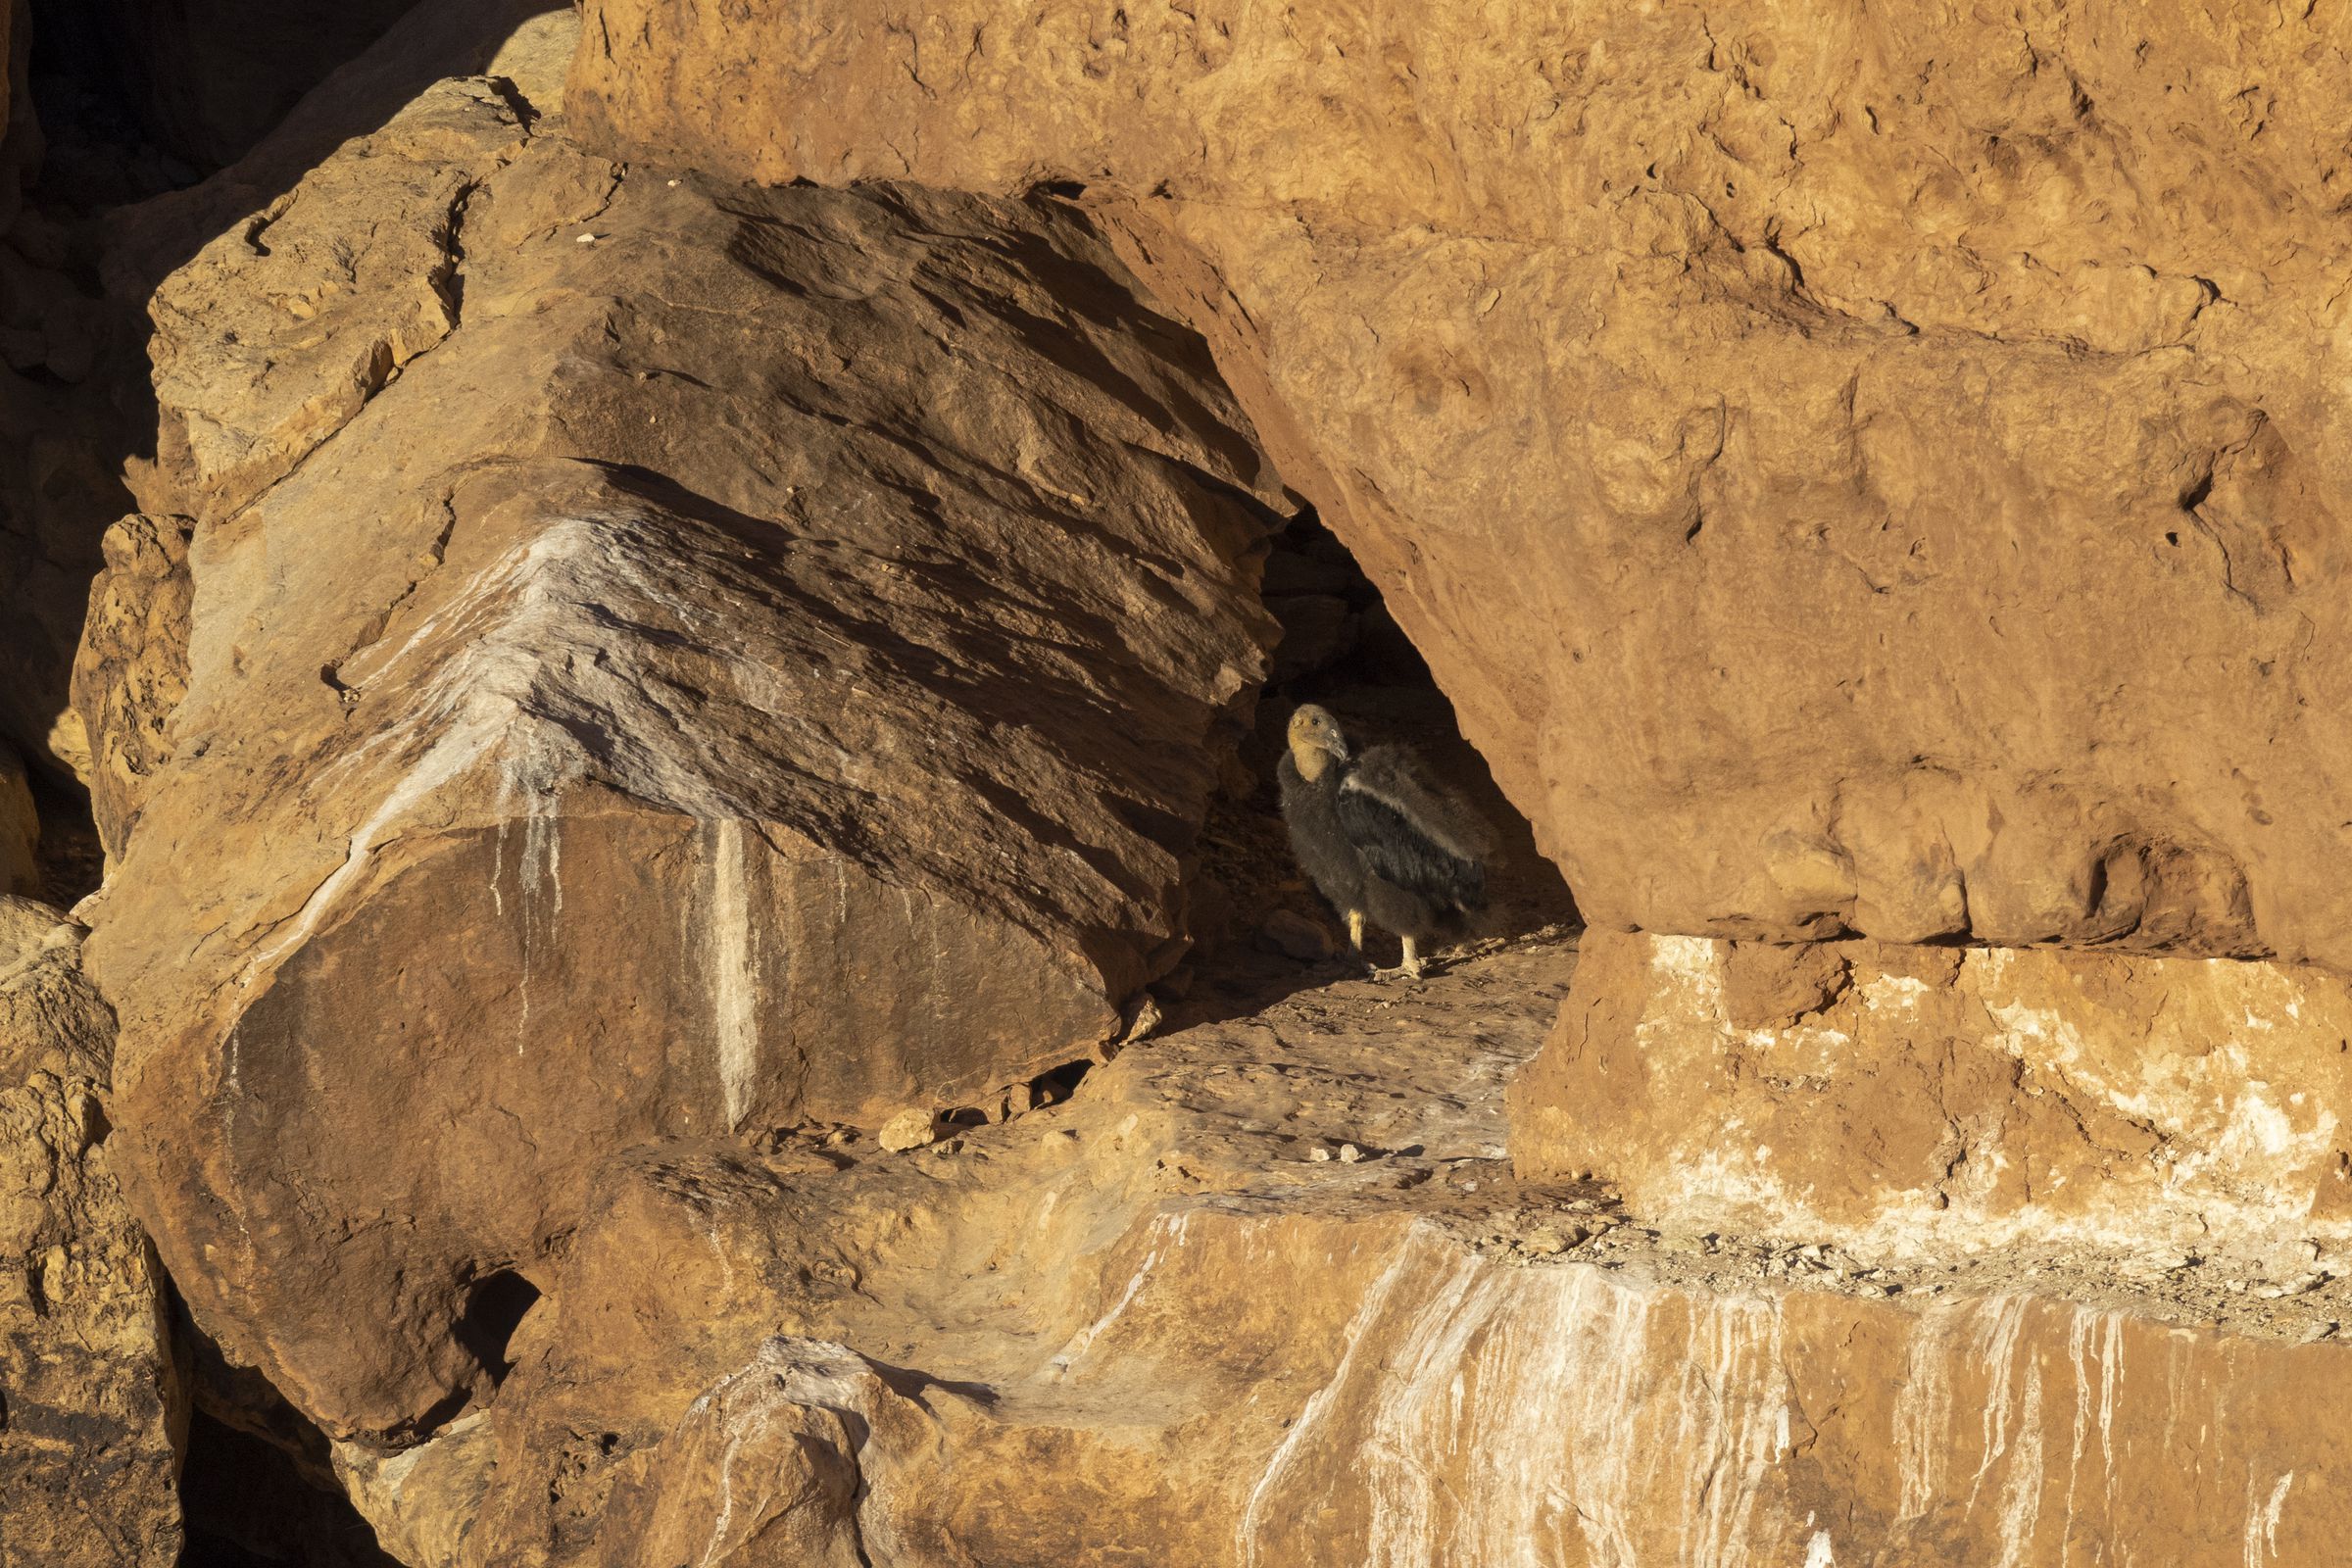 Zoo hatches record number of condor chicks to release into the wild